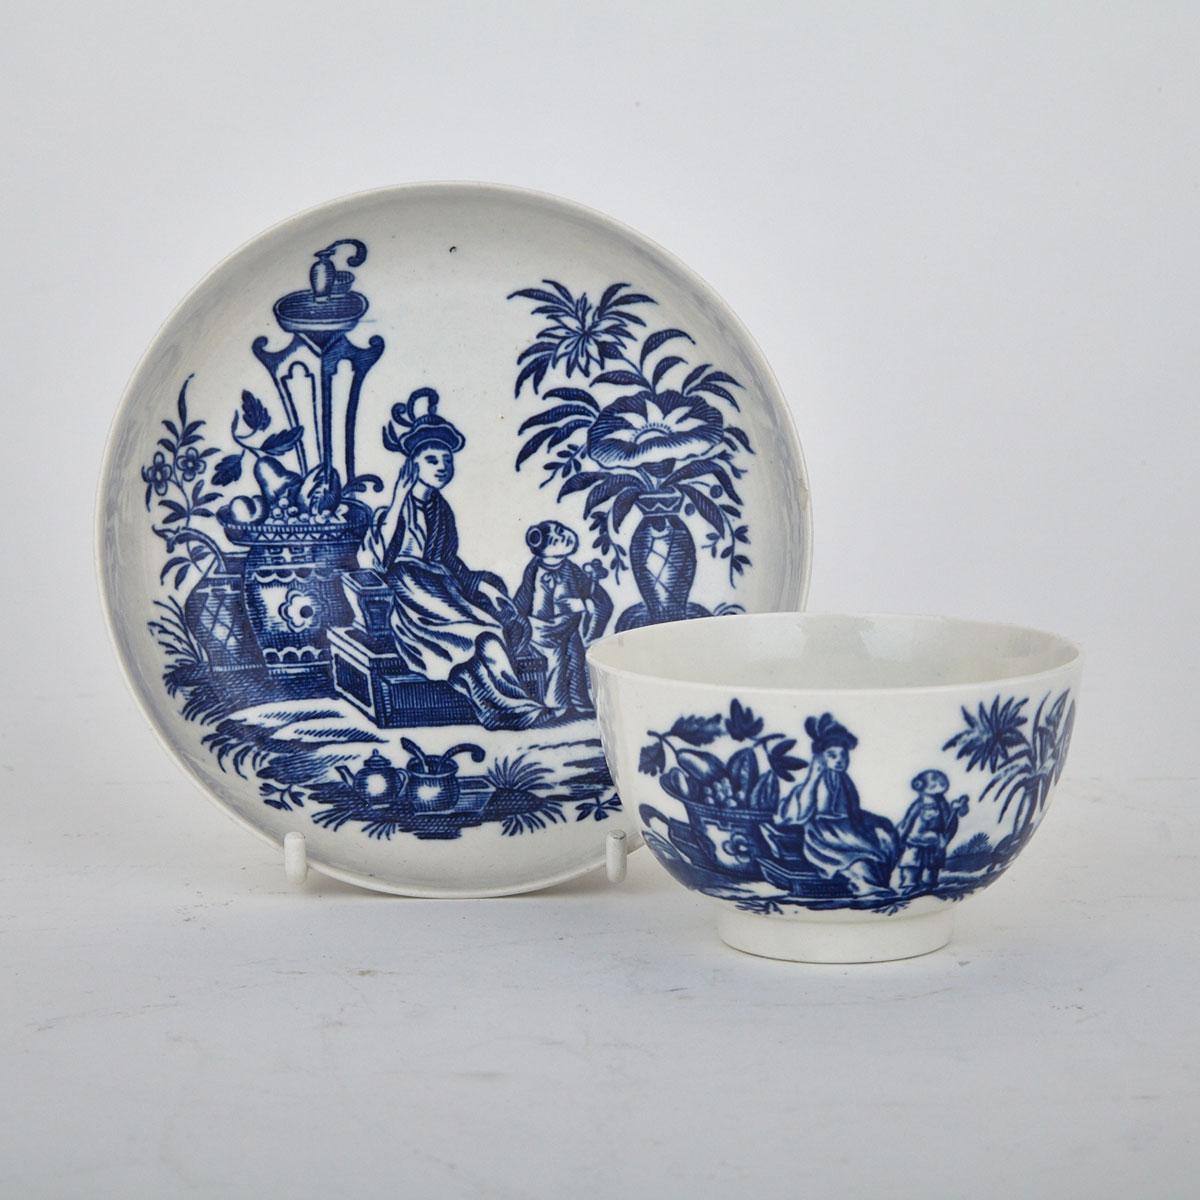 Worcester ‘Mother and Child’ Tea Bowl and Saucer, c.1775-85